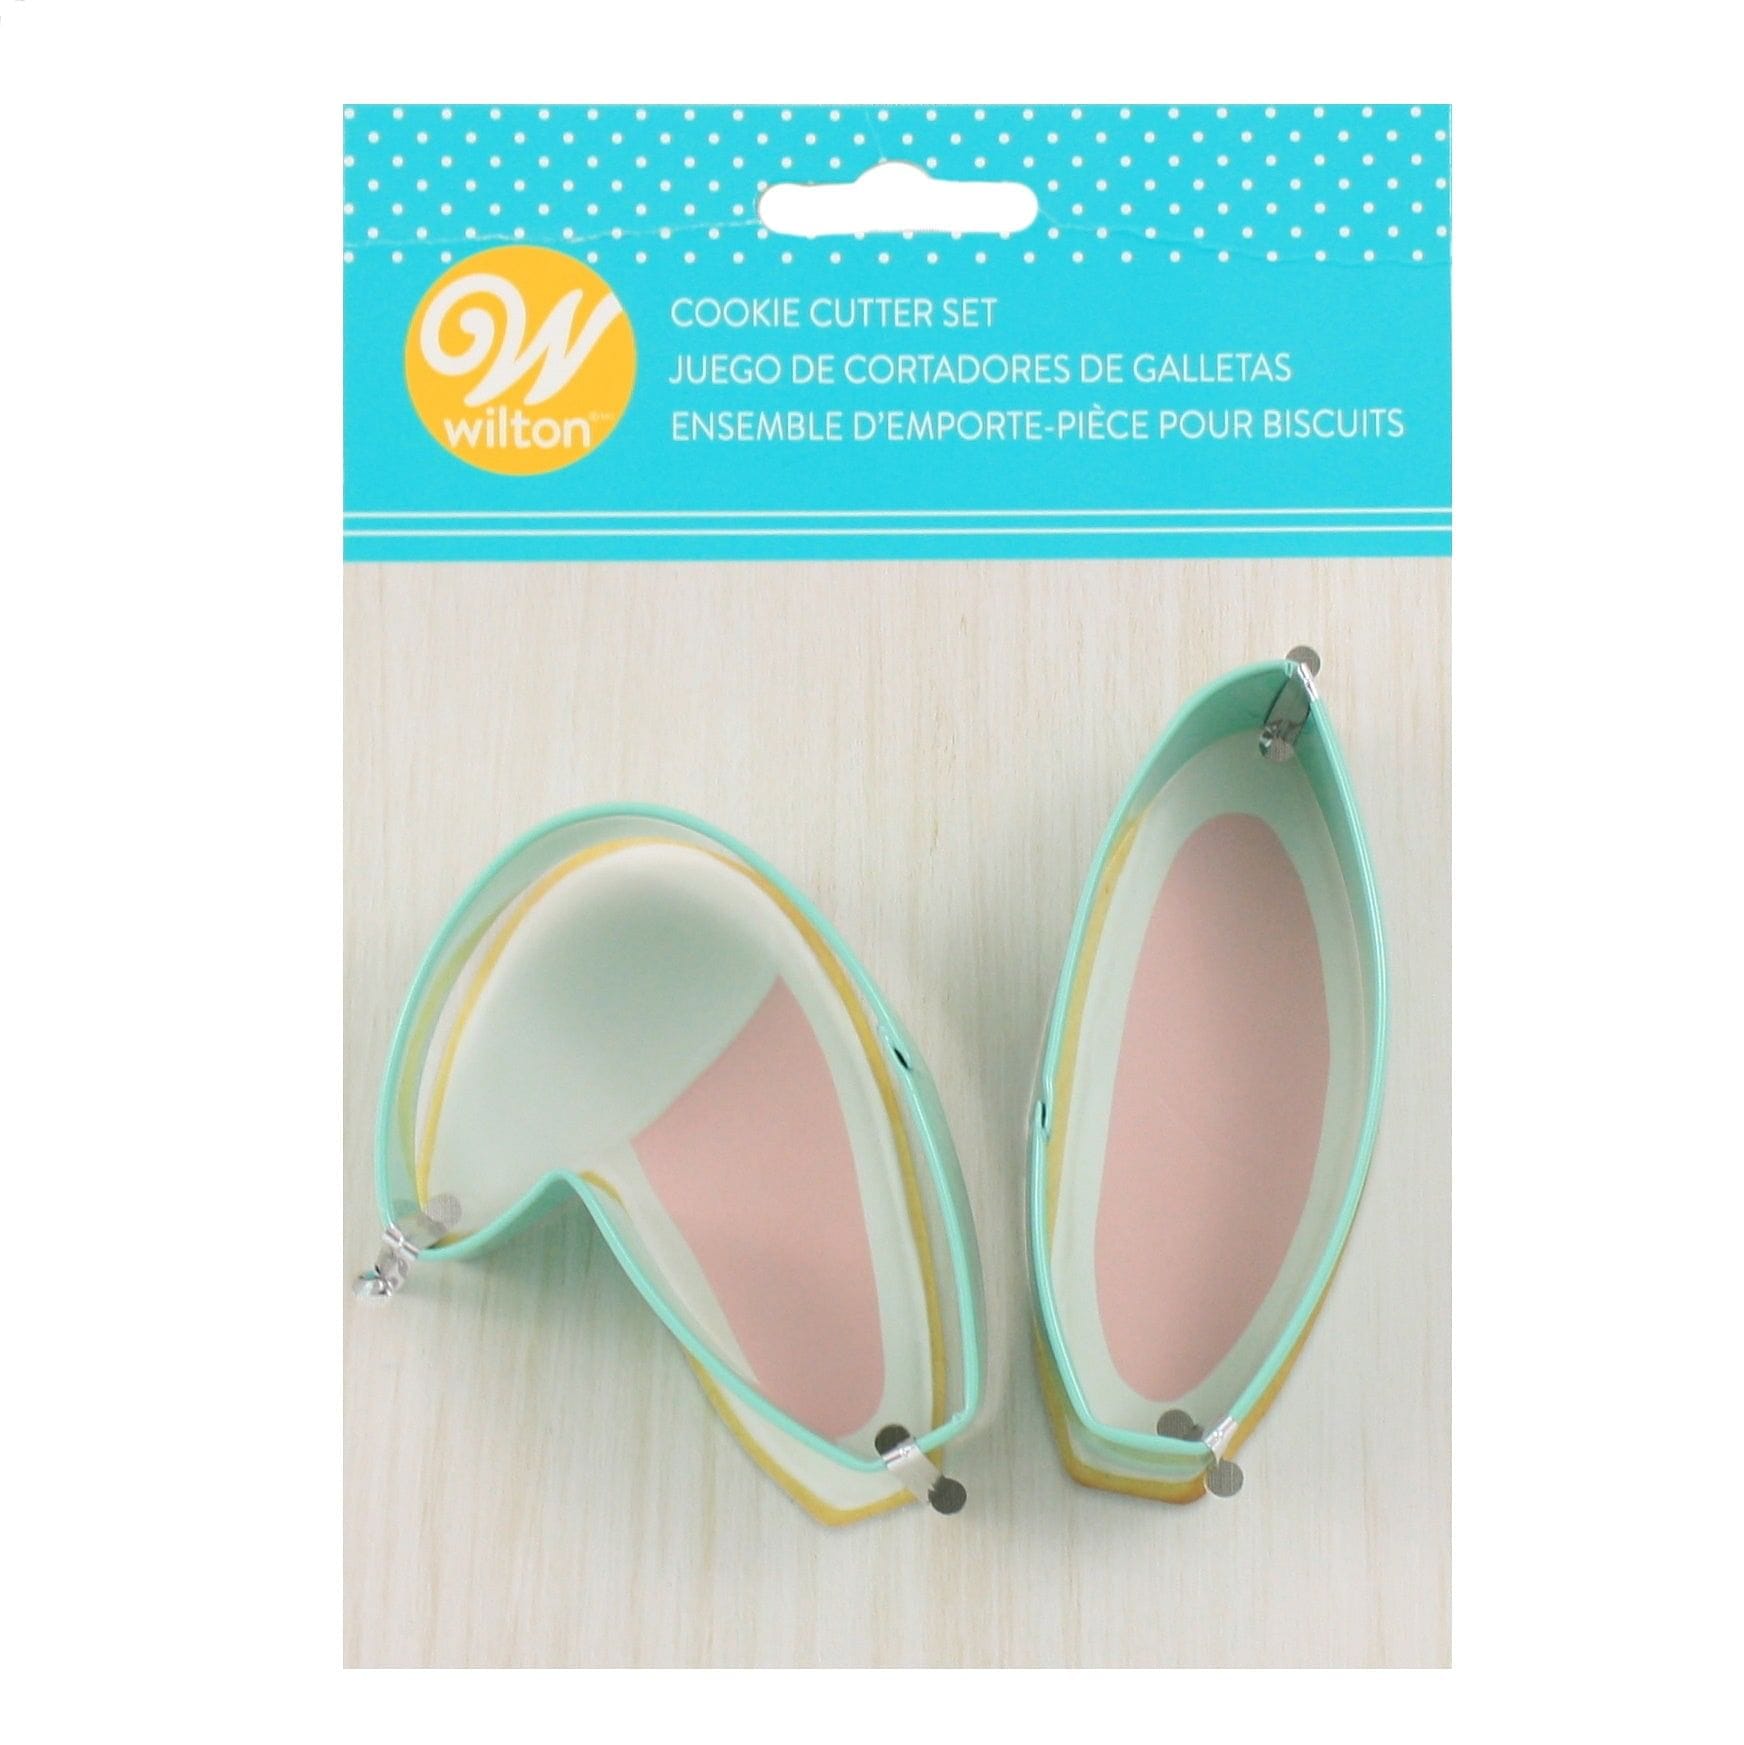 Bunny Ears Cookie  Cutter 2 Piece Set - Shelburne Country Store